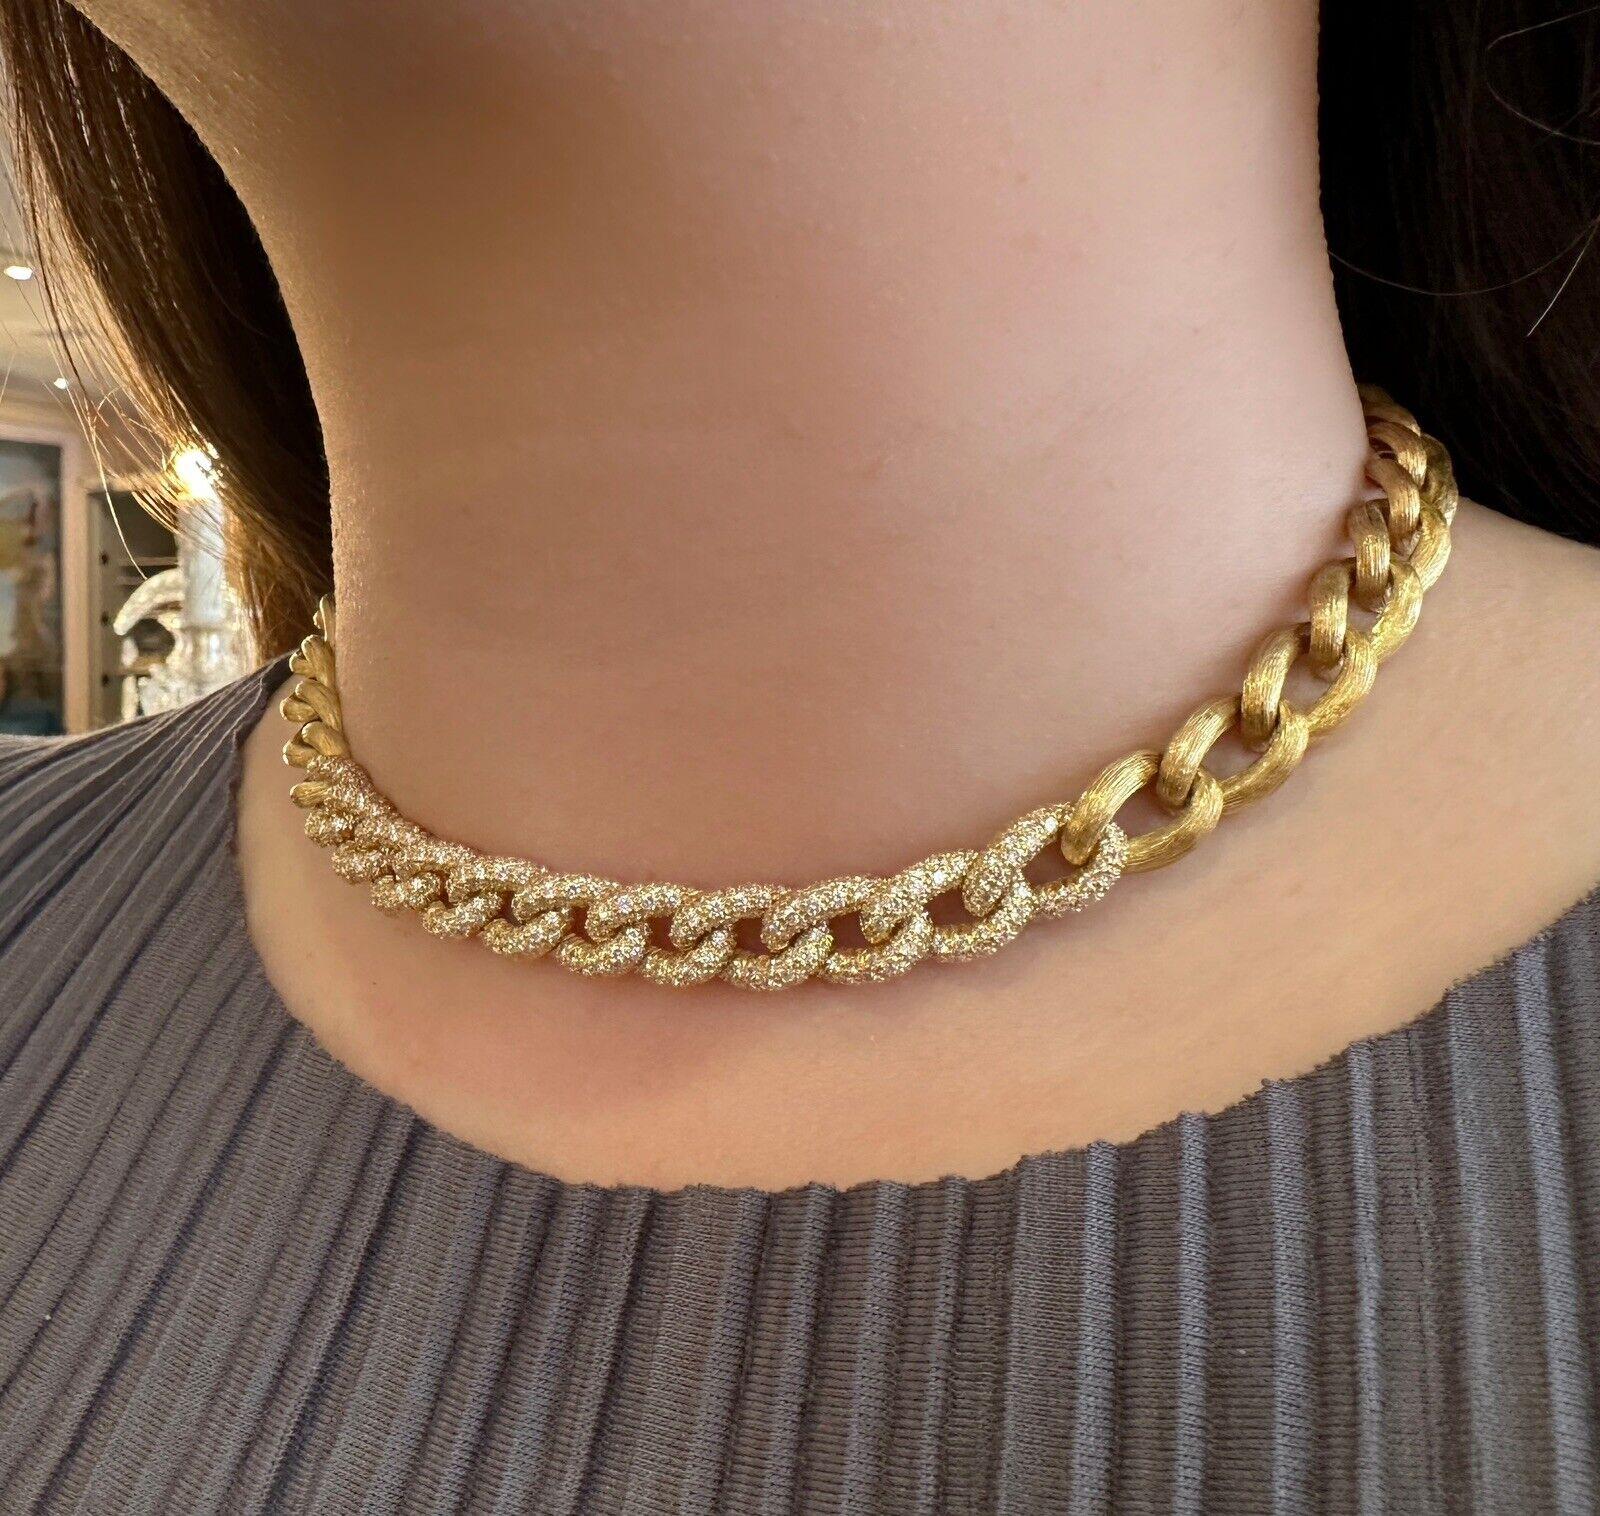 Henry Dunay Curb Diamond Sabi Link Necklace in 18k Yellow Gold In Excellent Condition For Sale In La Jolla, CA